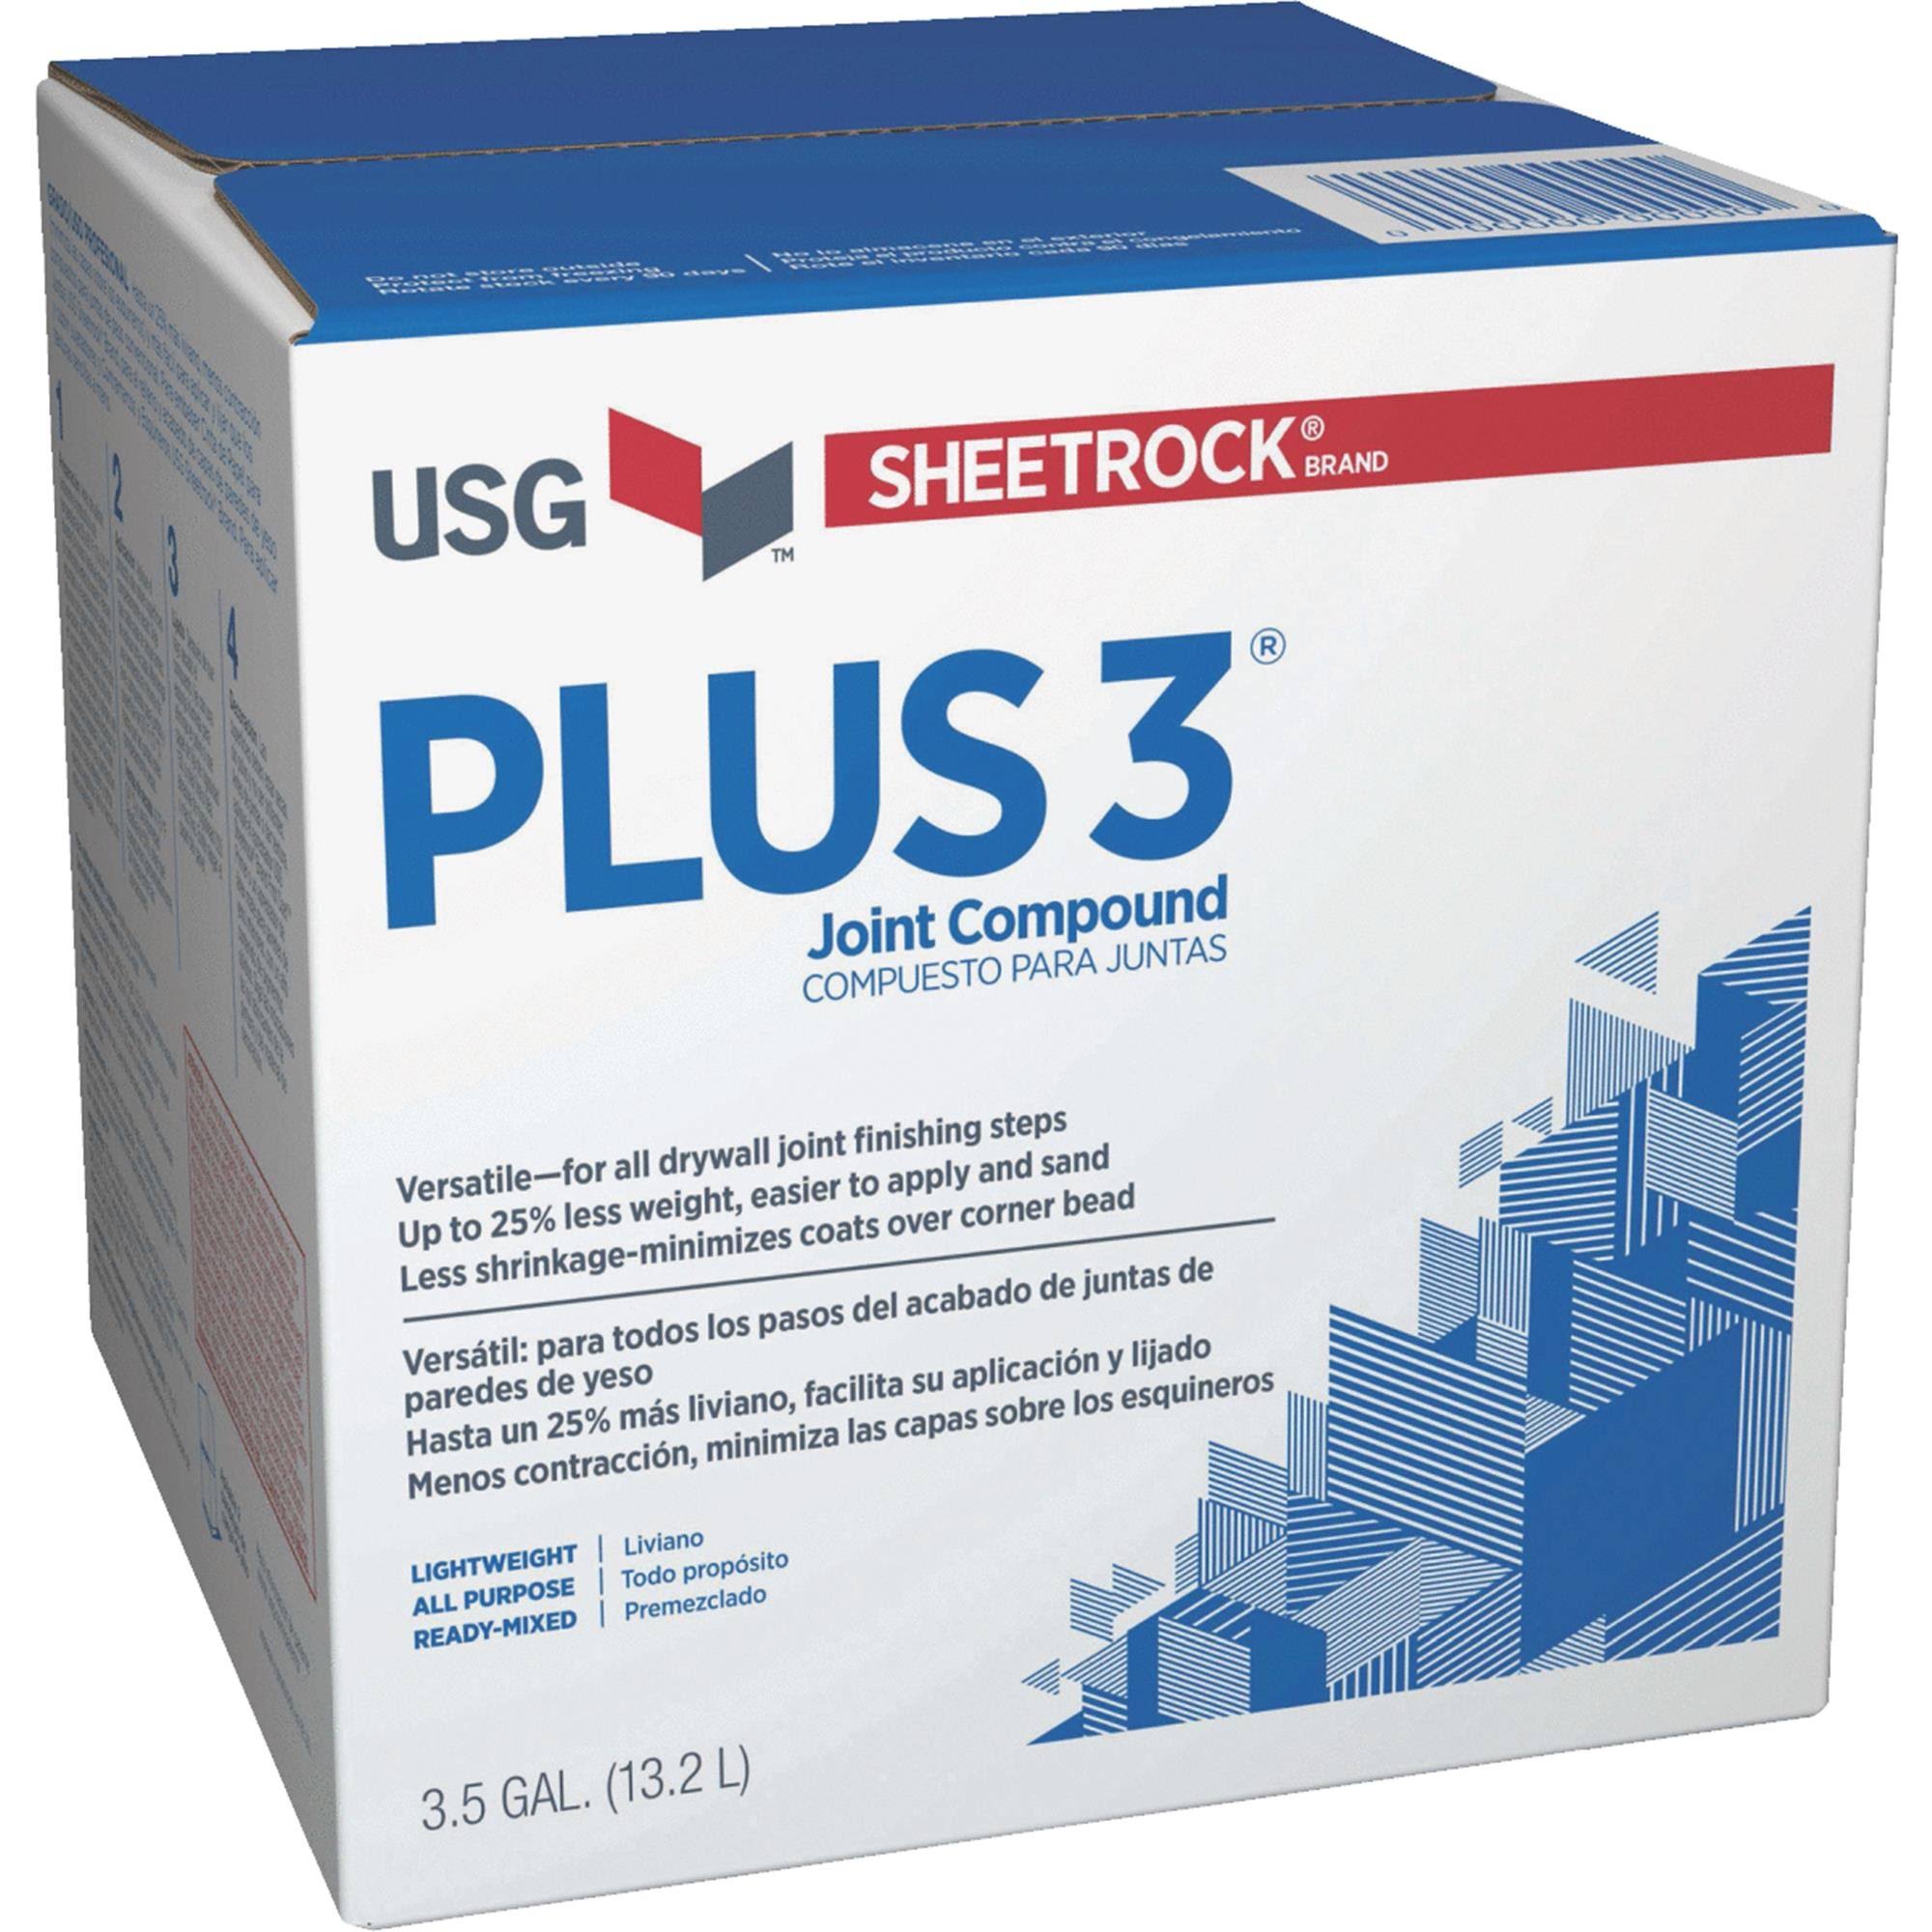 USG Sheetrock Plus 3 All-Purpose Joint Compound